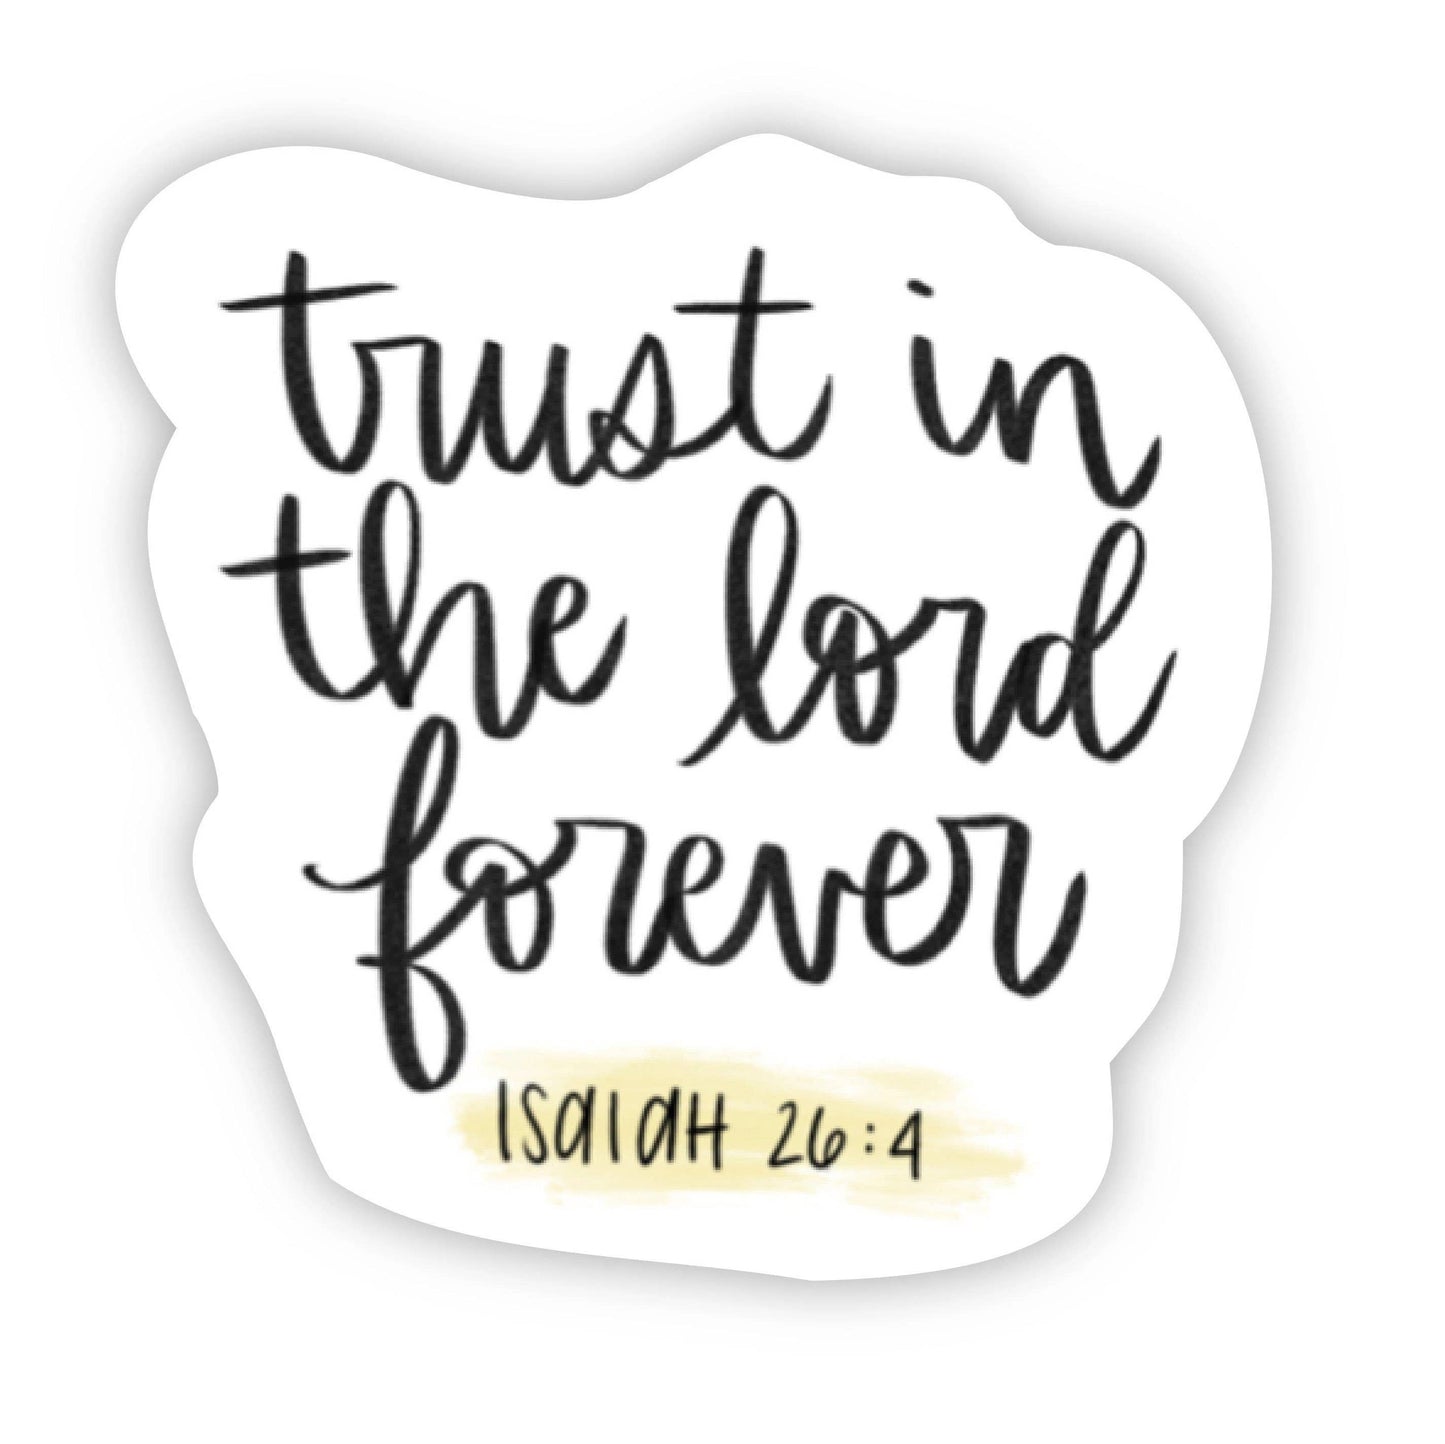 Trust in The Lord Forever - Isaiah 26 vs 4